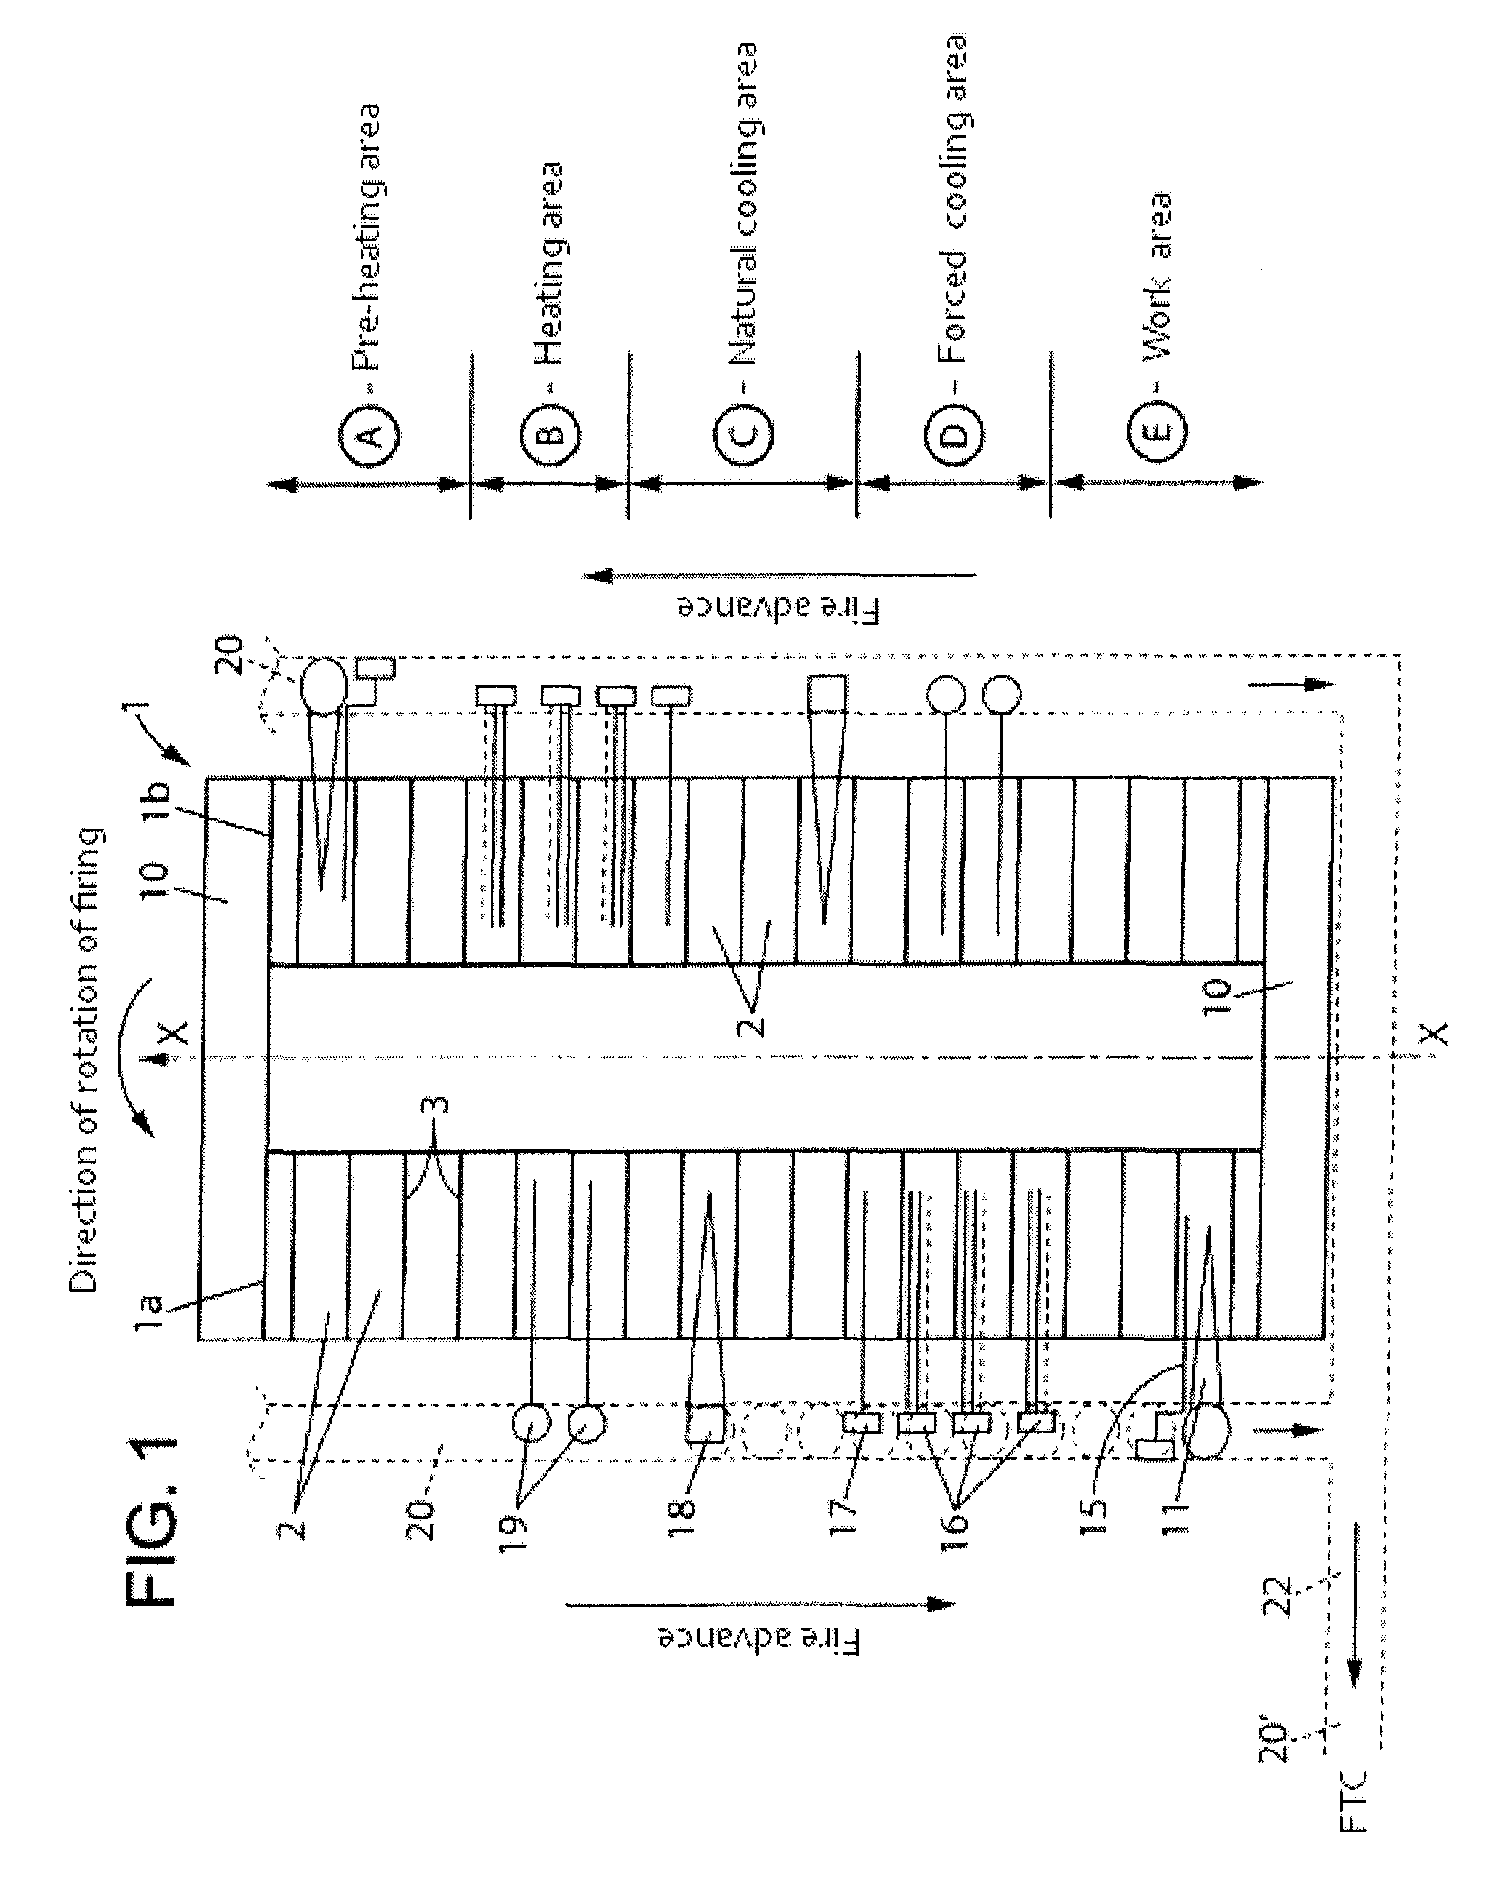 Method of monitoring an exhaust fumes main linking a carbon block baking furnace to a fume treatment